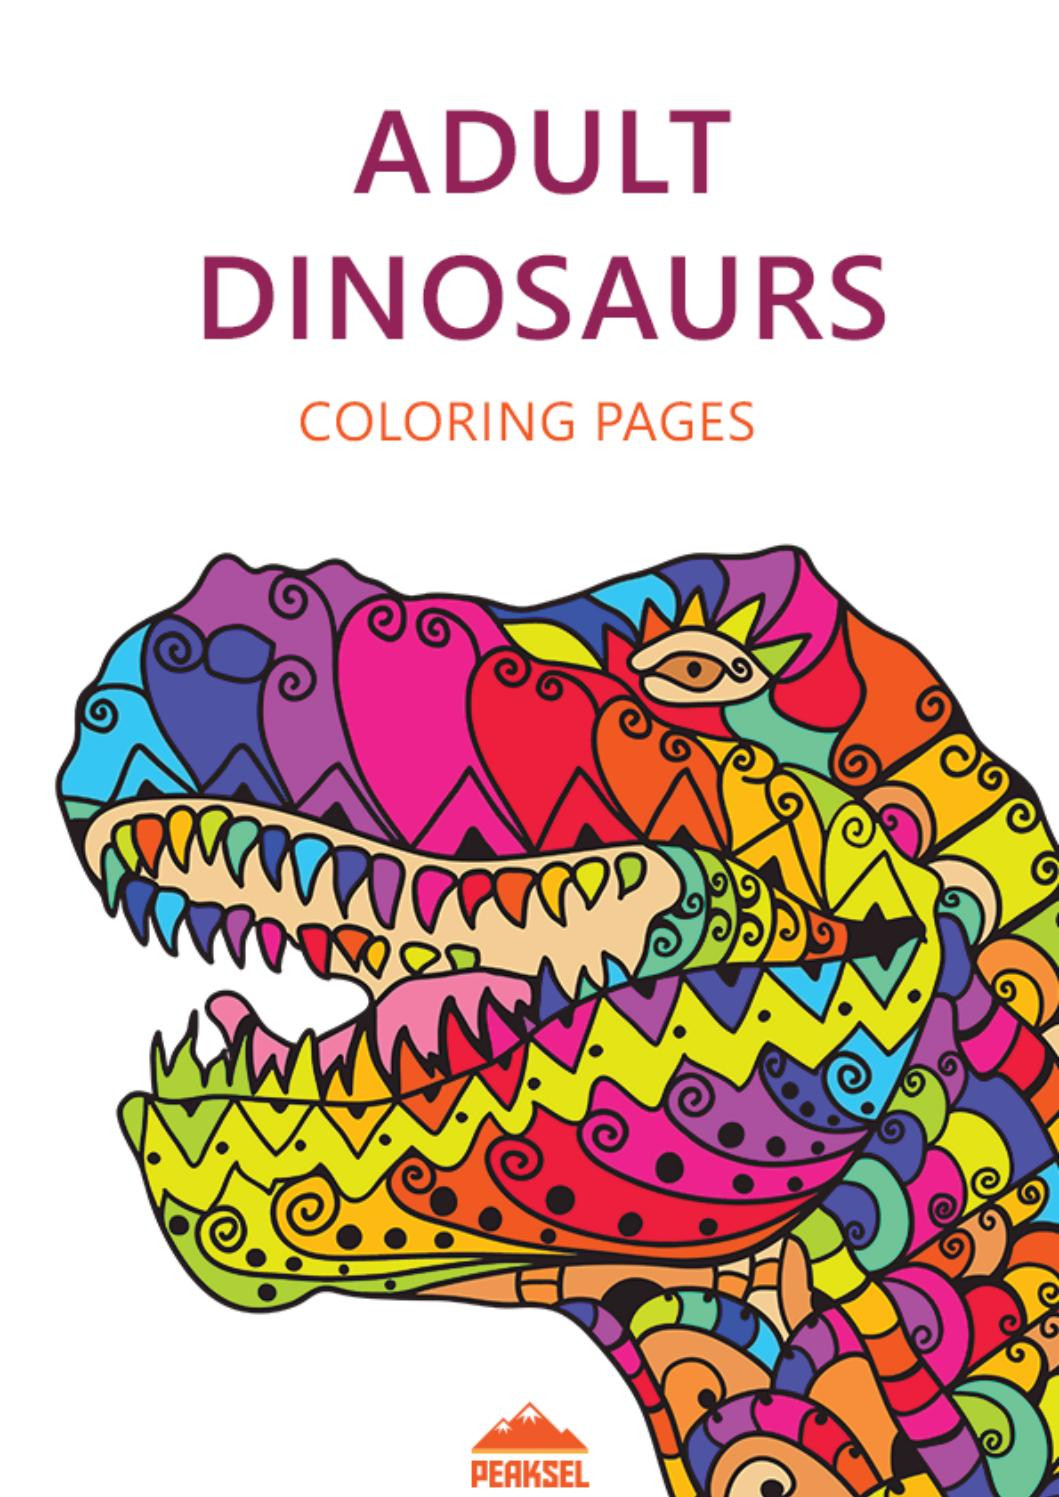 Dinosaur Coloring Pages For Adults
 Dinosaur Coloring Pages For Adults Free Printable